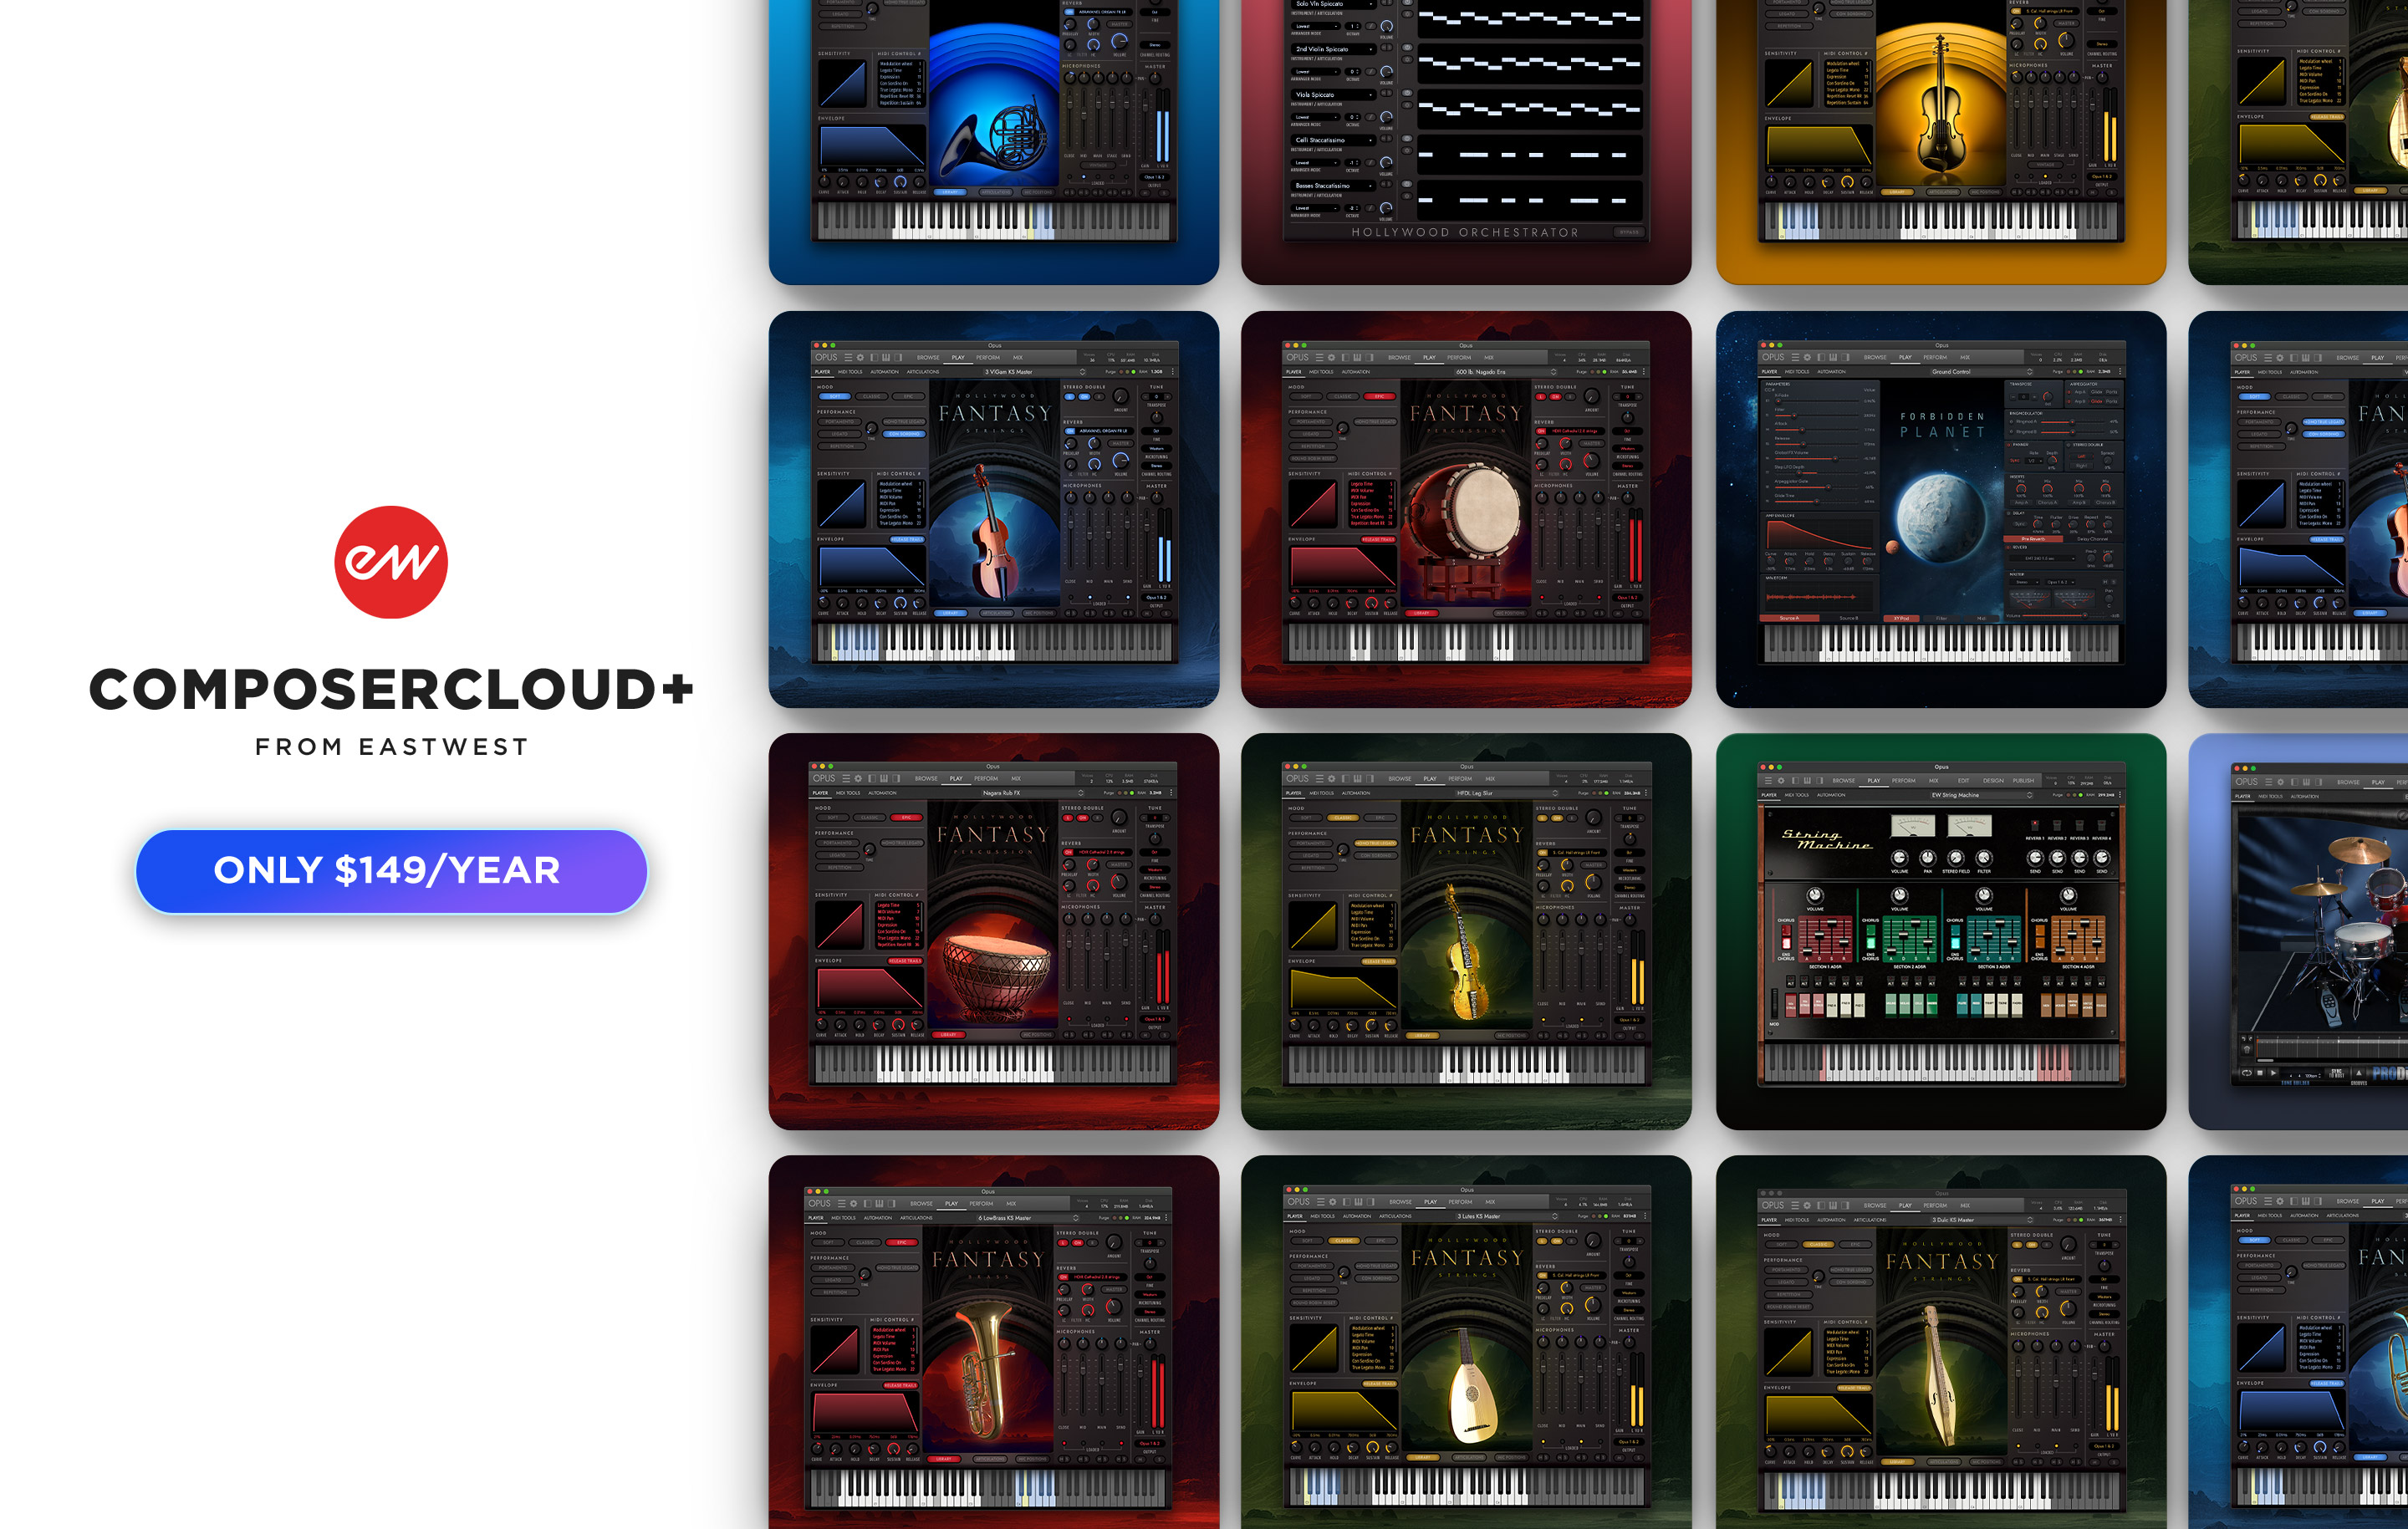 EastWest ComposerCloud+ - All of EastWest's 42,000+ Award-Winning Virtual Instruments for only $19.99 per month